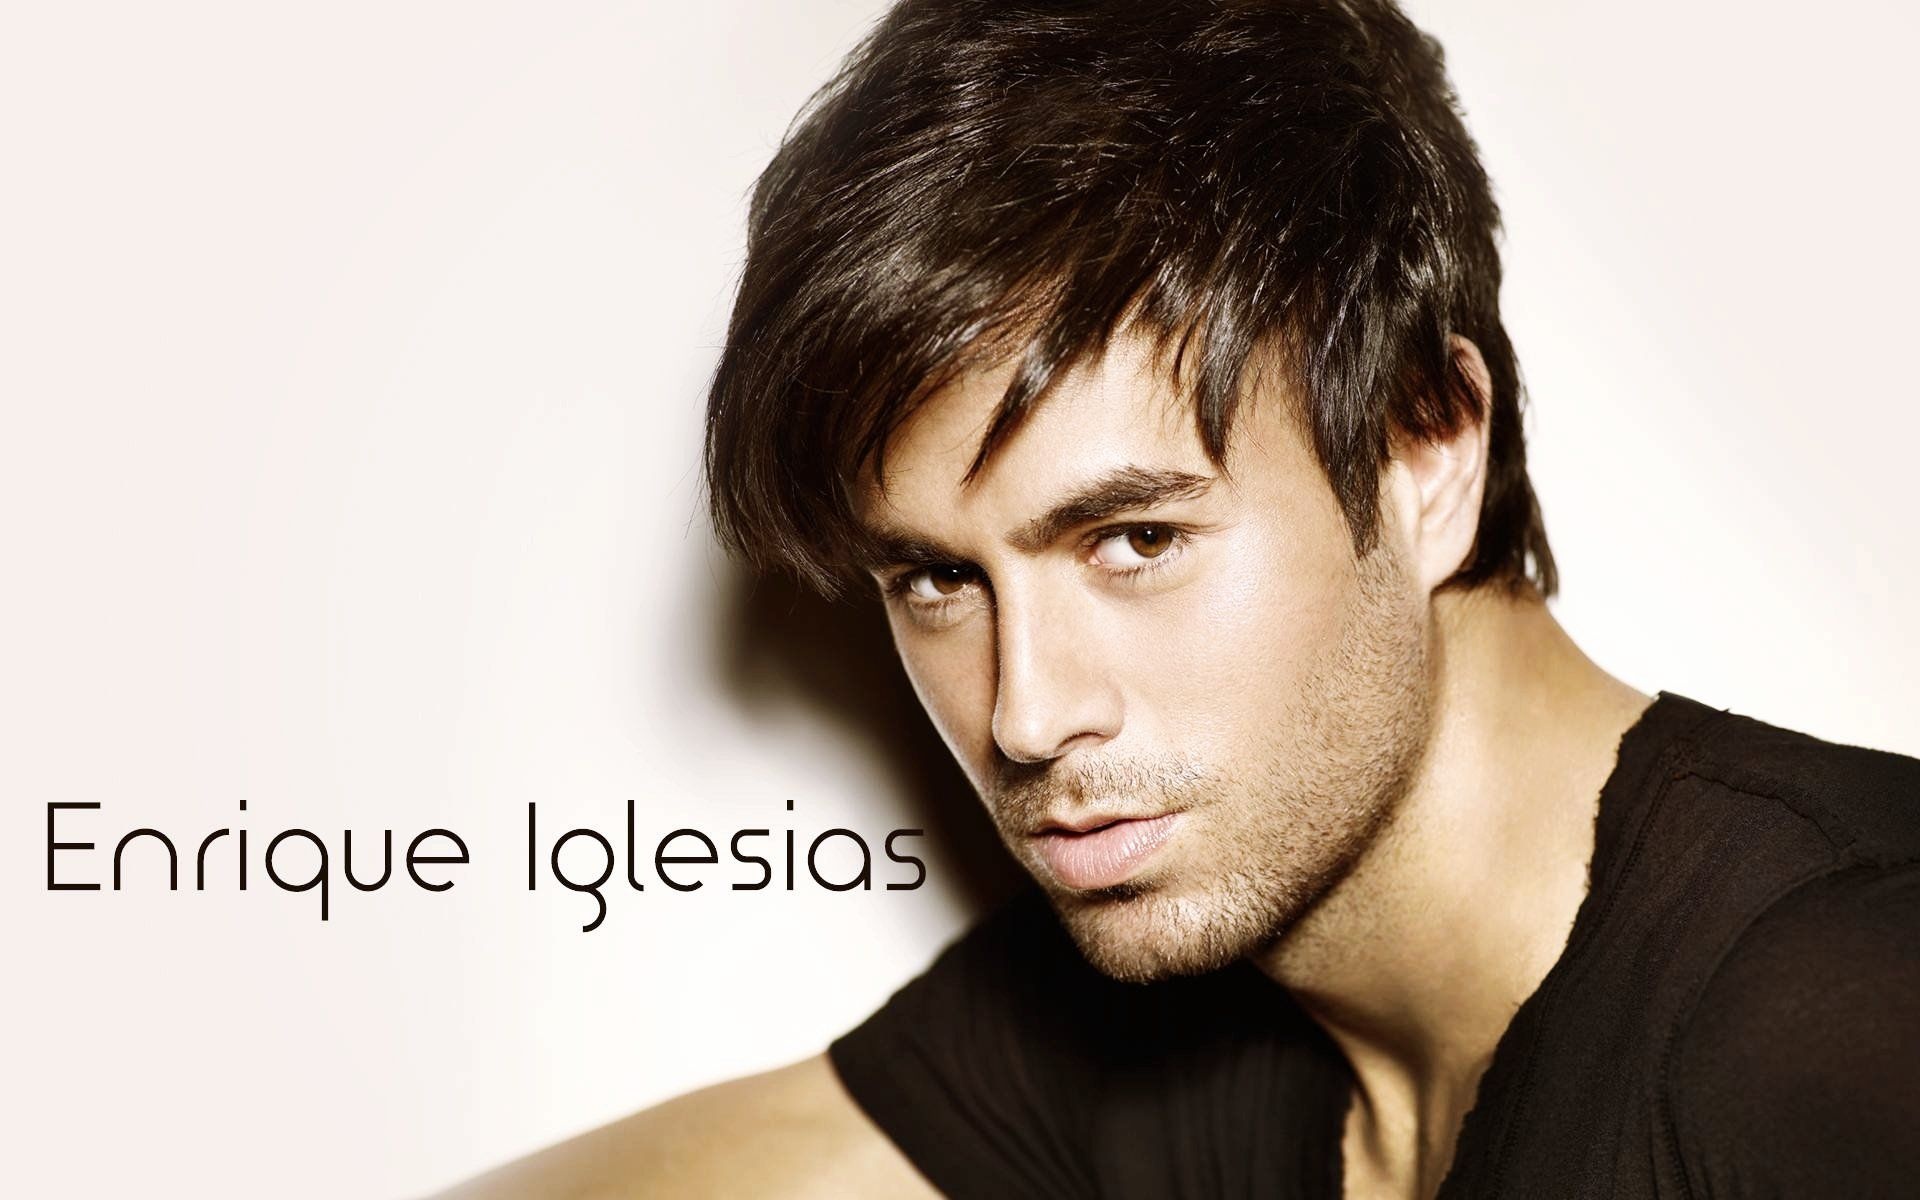 Enrique Iglesias and Anna Kournikova: Known for the duet with Whitney Houston titled “Could I Have This Kiss Forever”. 1920x1200 HD Wallpaper.